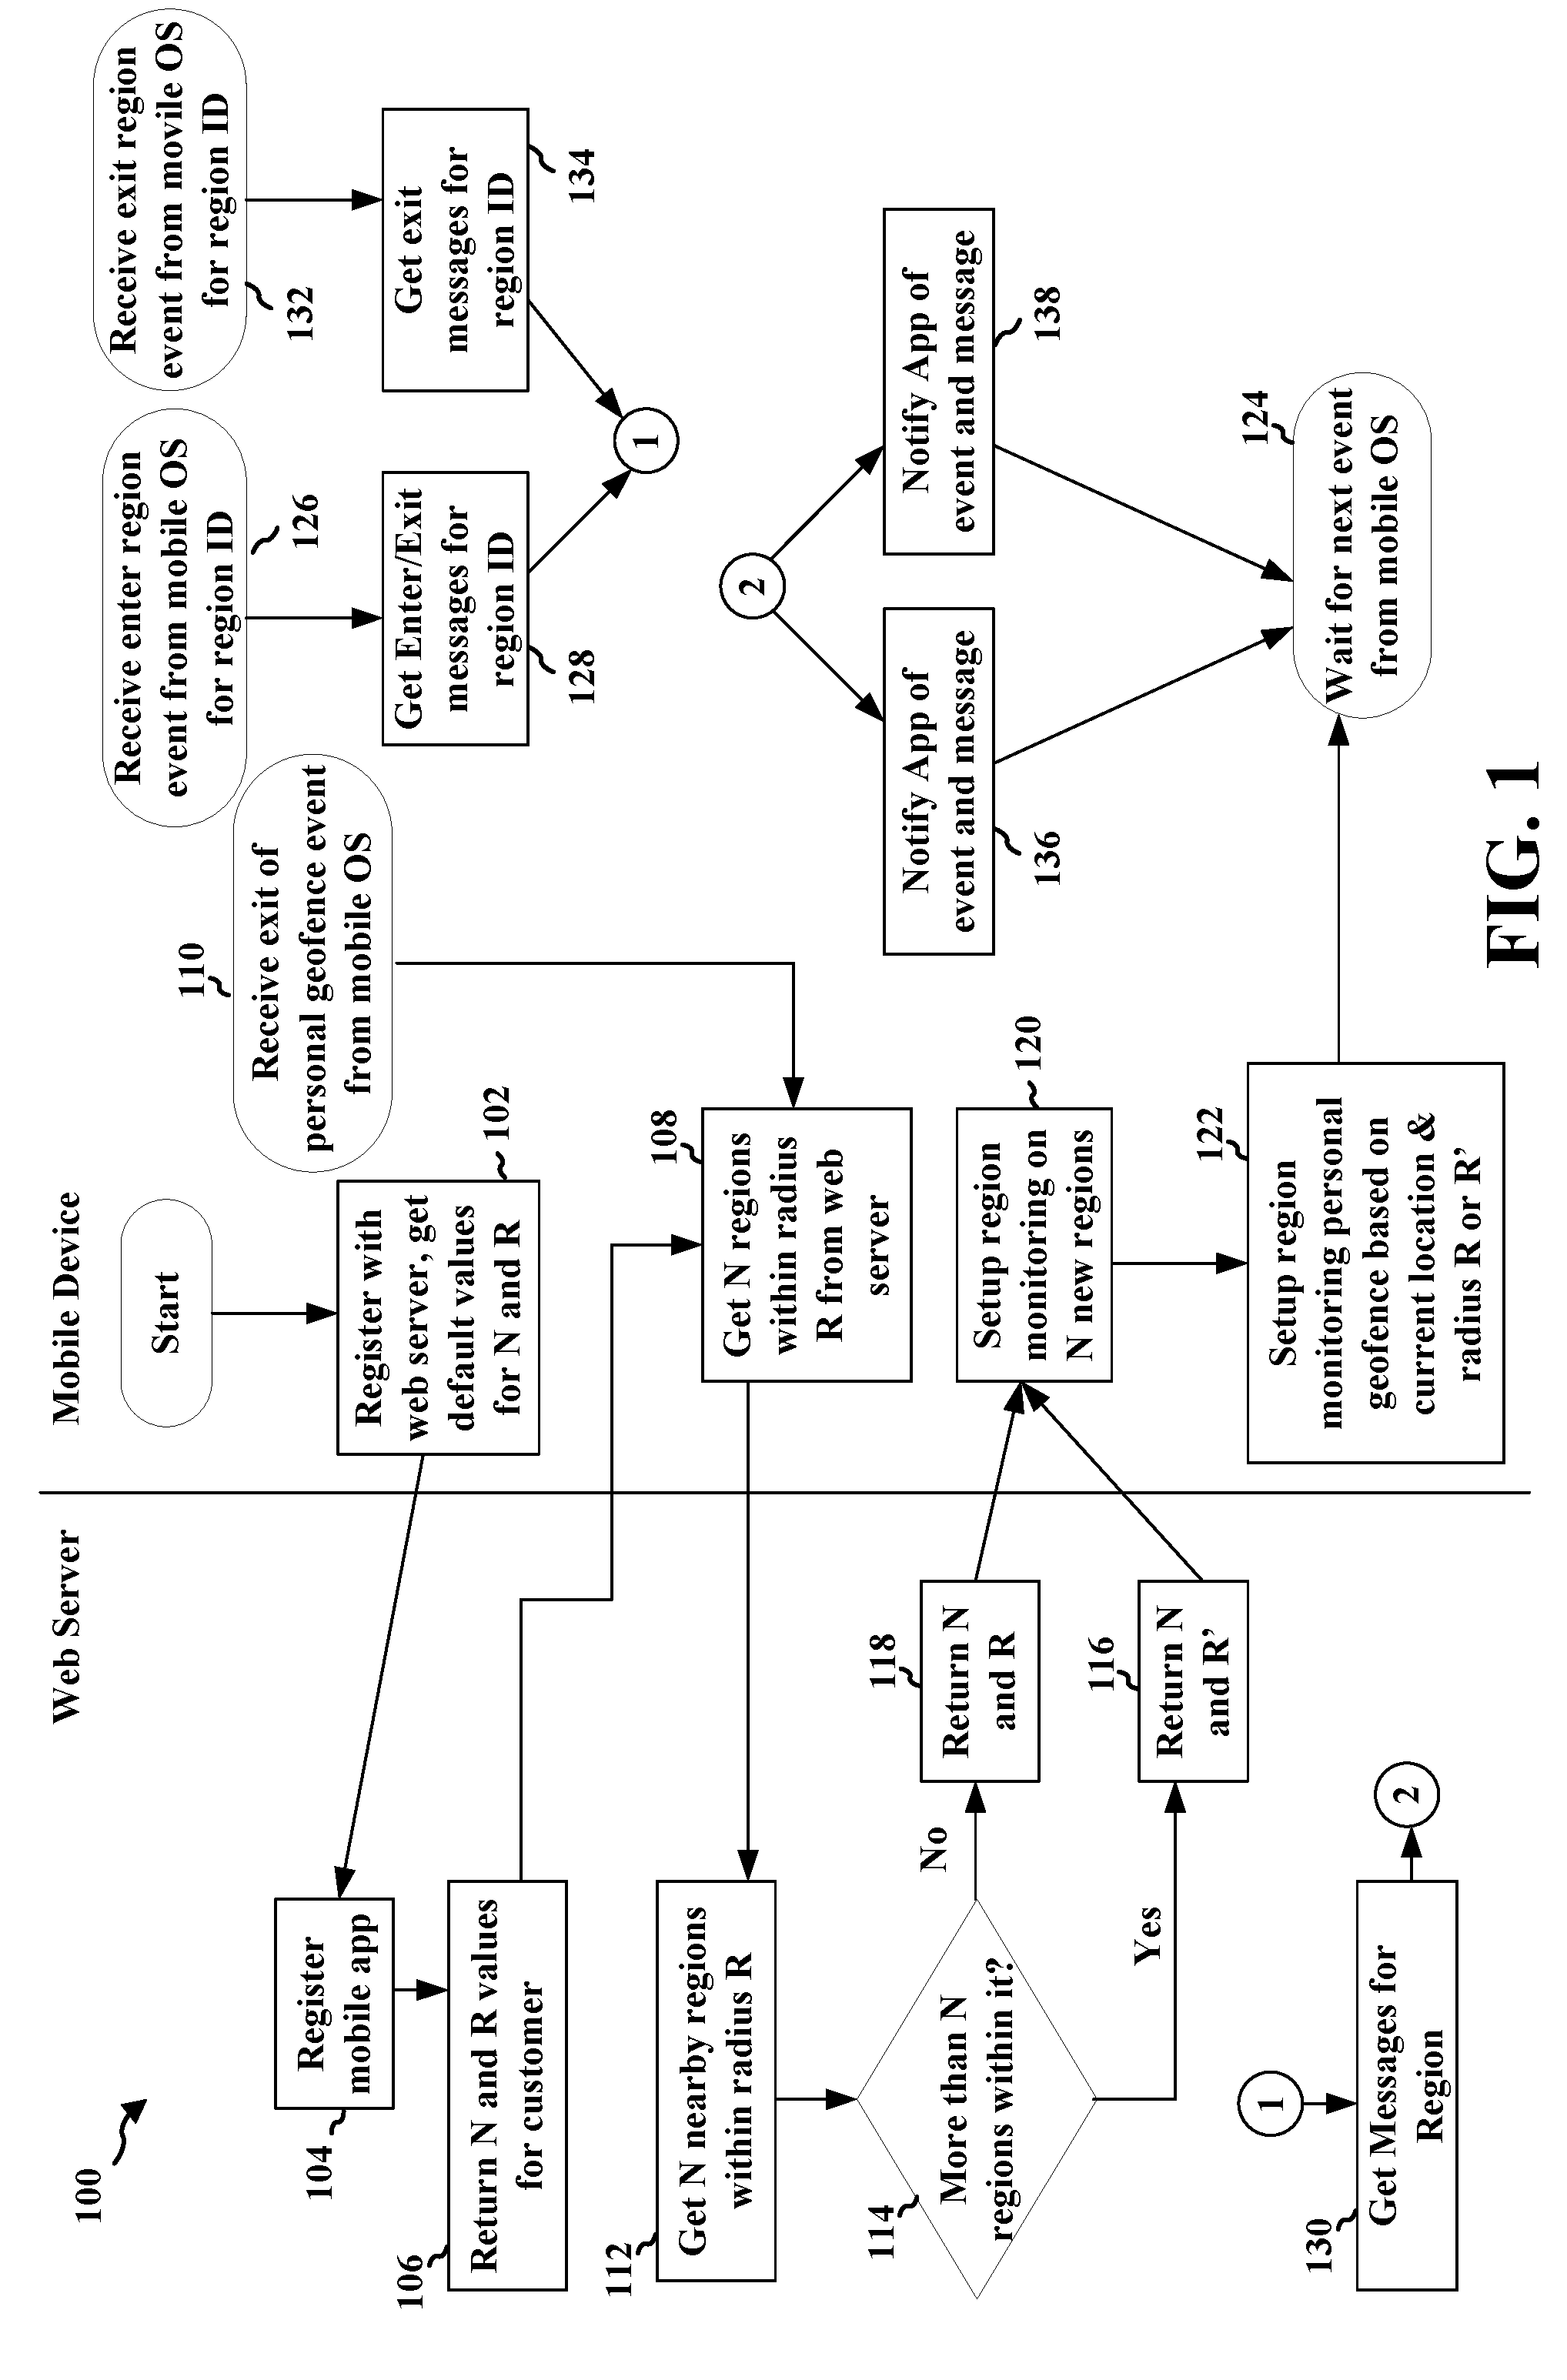 Method for optimizing mobile device region monitoring and region management for an anonymous mobile device